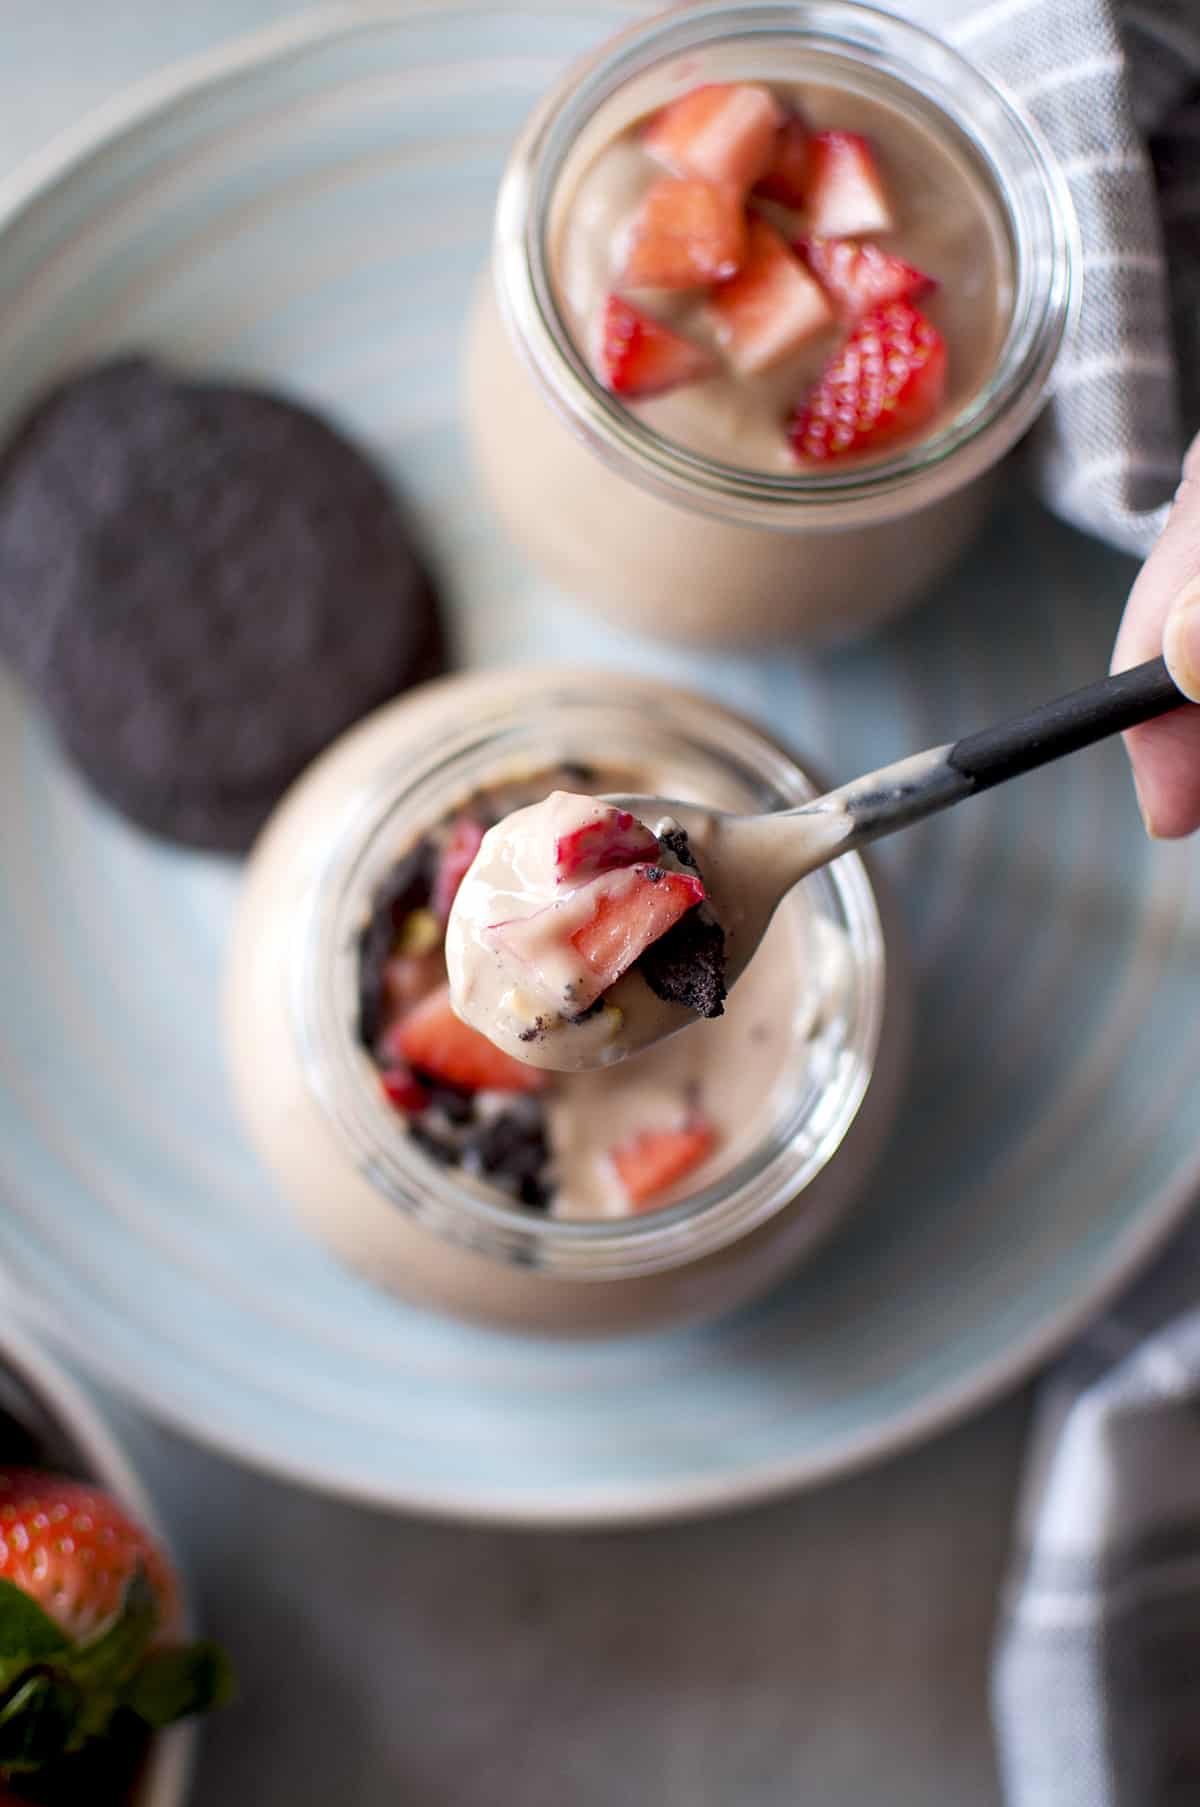 Hand holding a spoon with chocolate pudding and strawberries